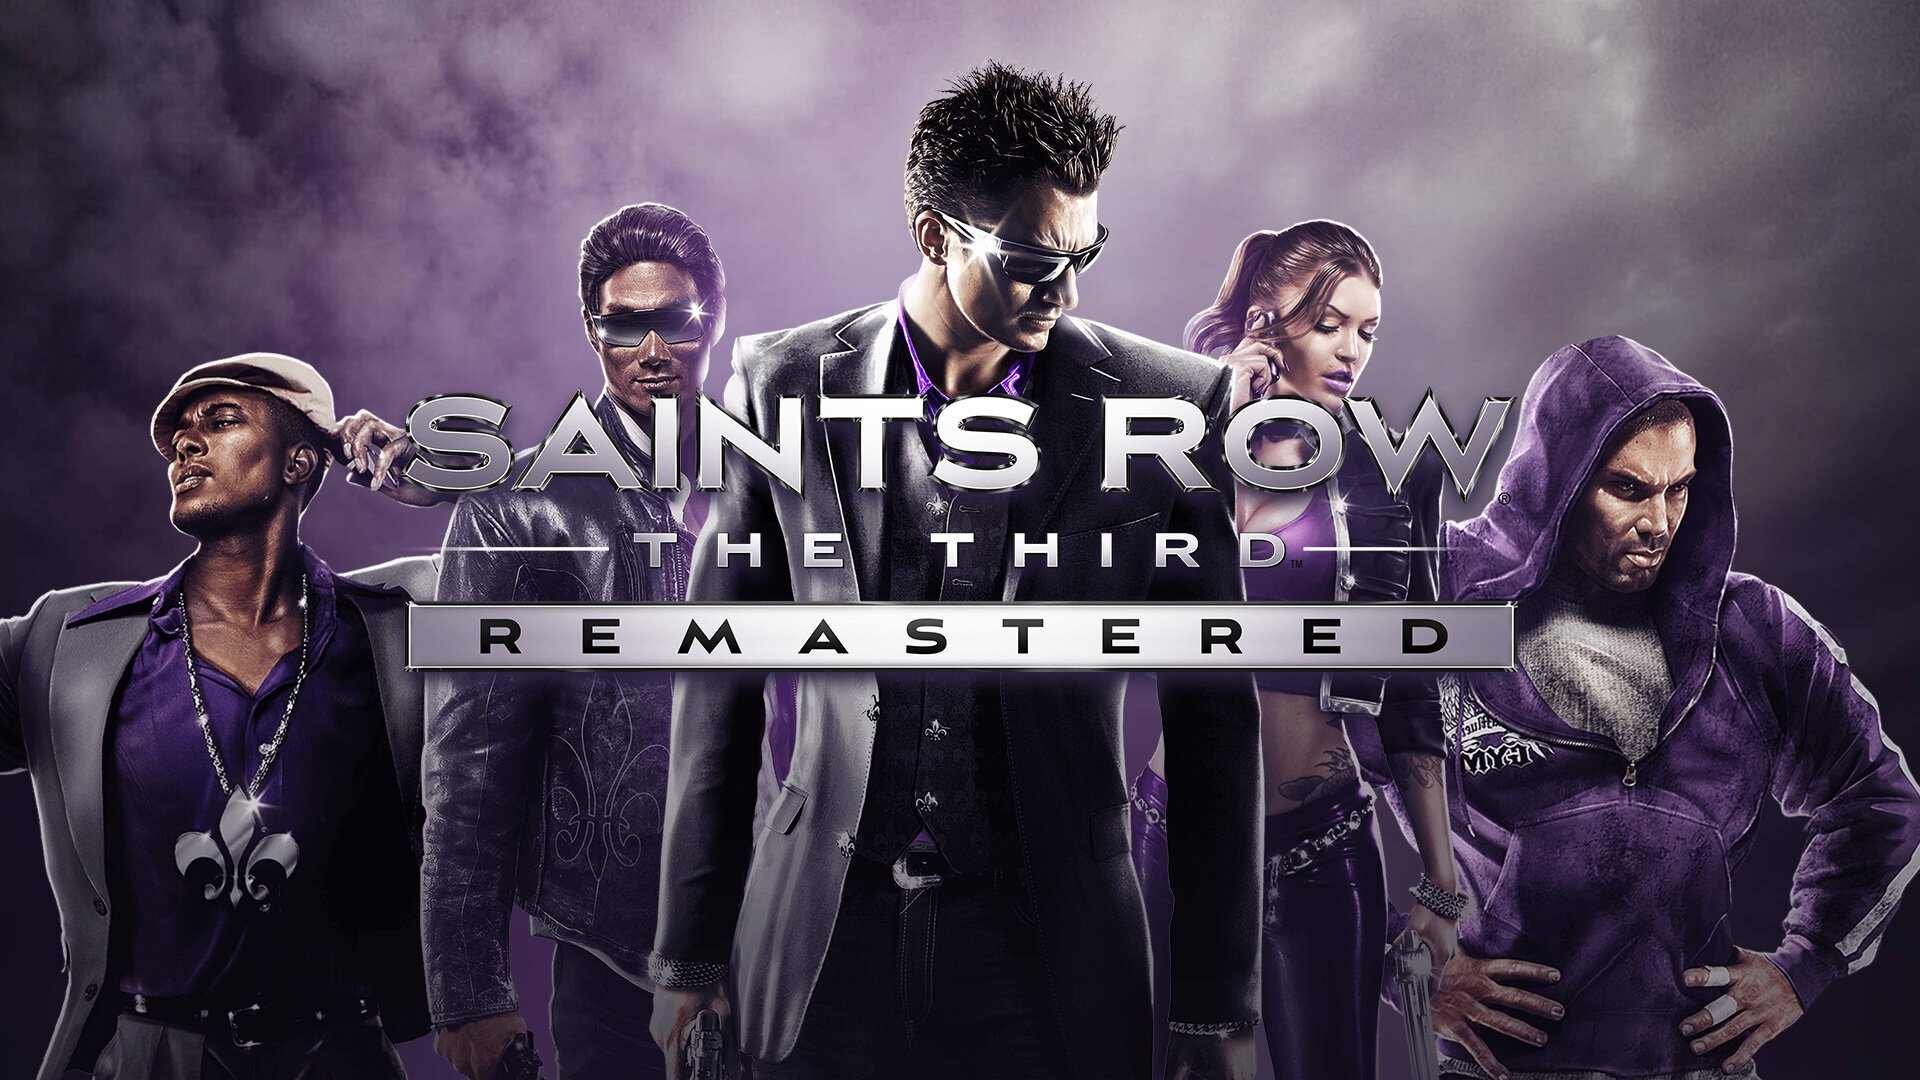 Saints Row The Third Remastered now free to claim on the Epic Games Store.